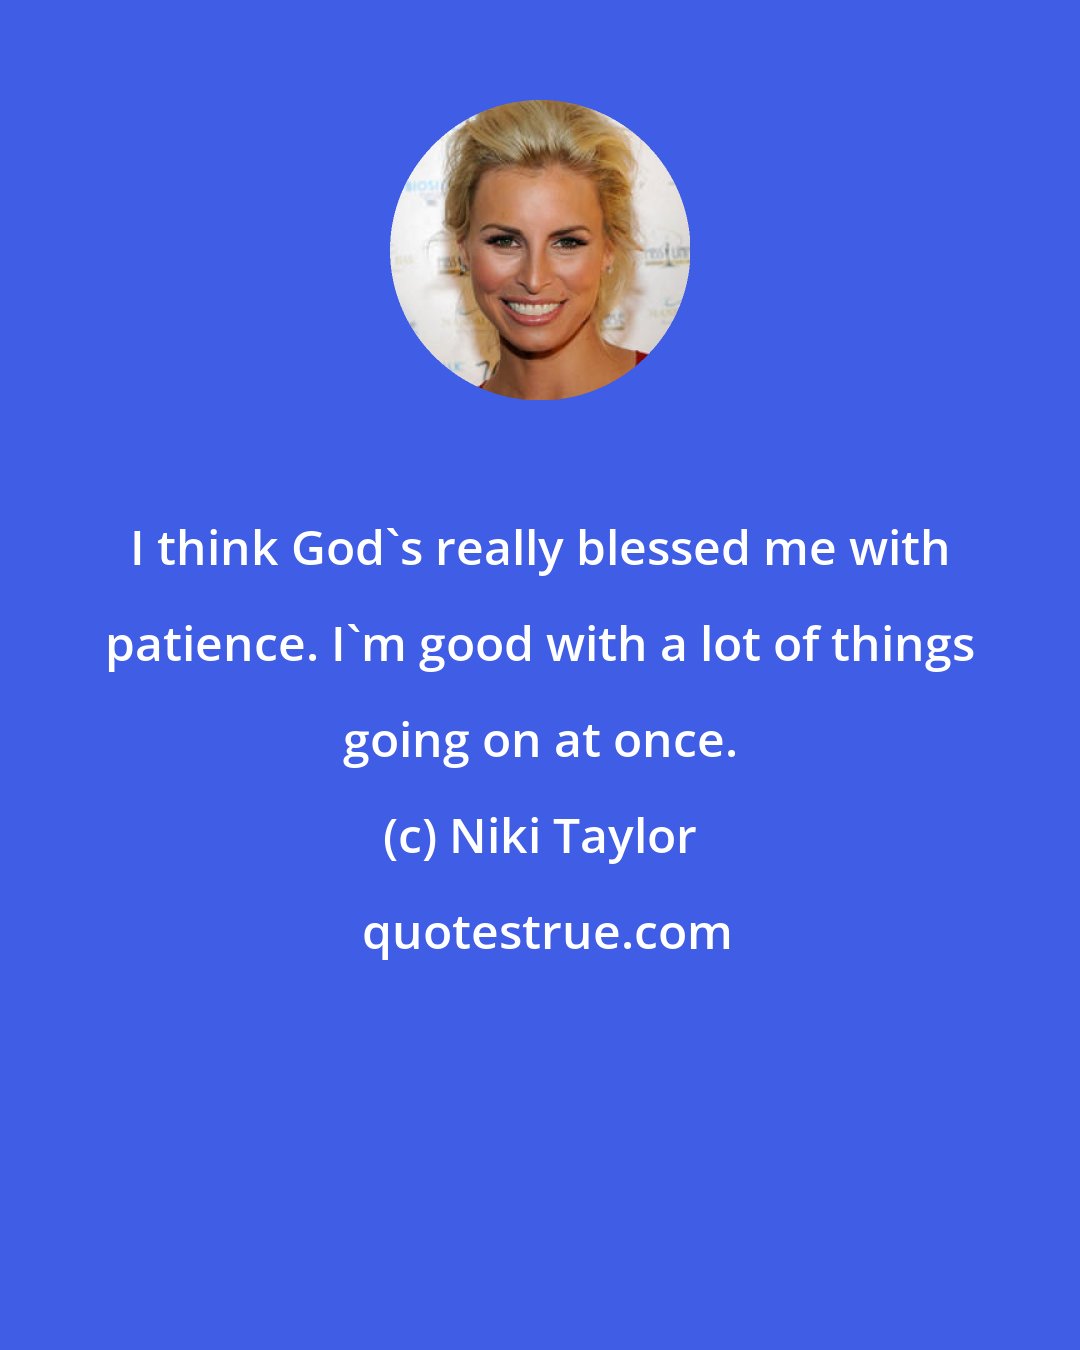 Niki Taylor: I think God's really blessed me with patience. I'm good with a lot of things going on at once.